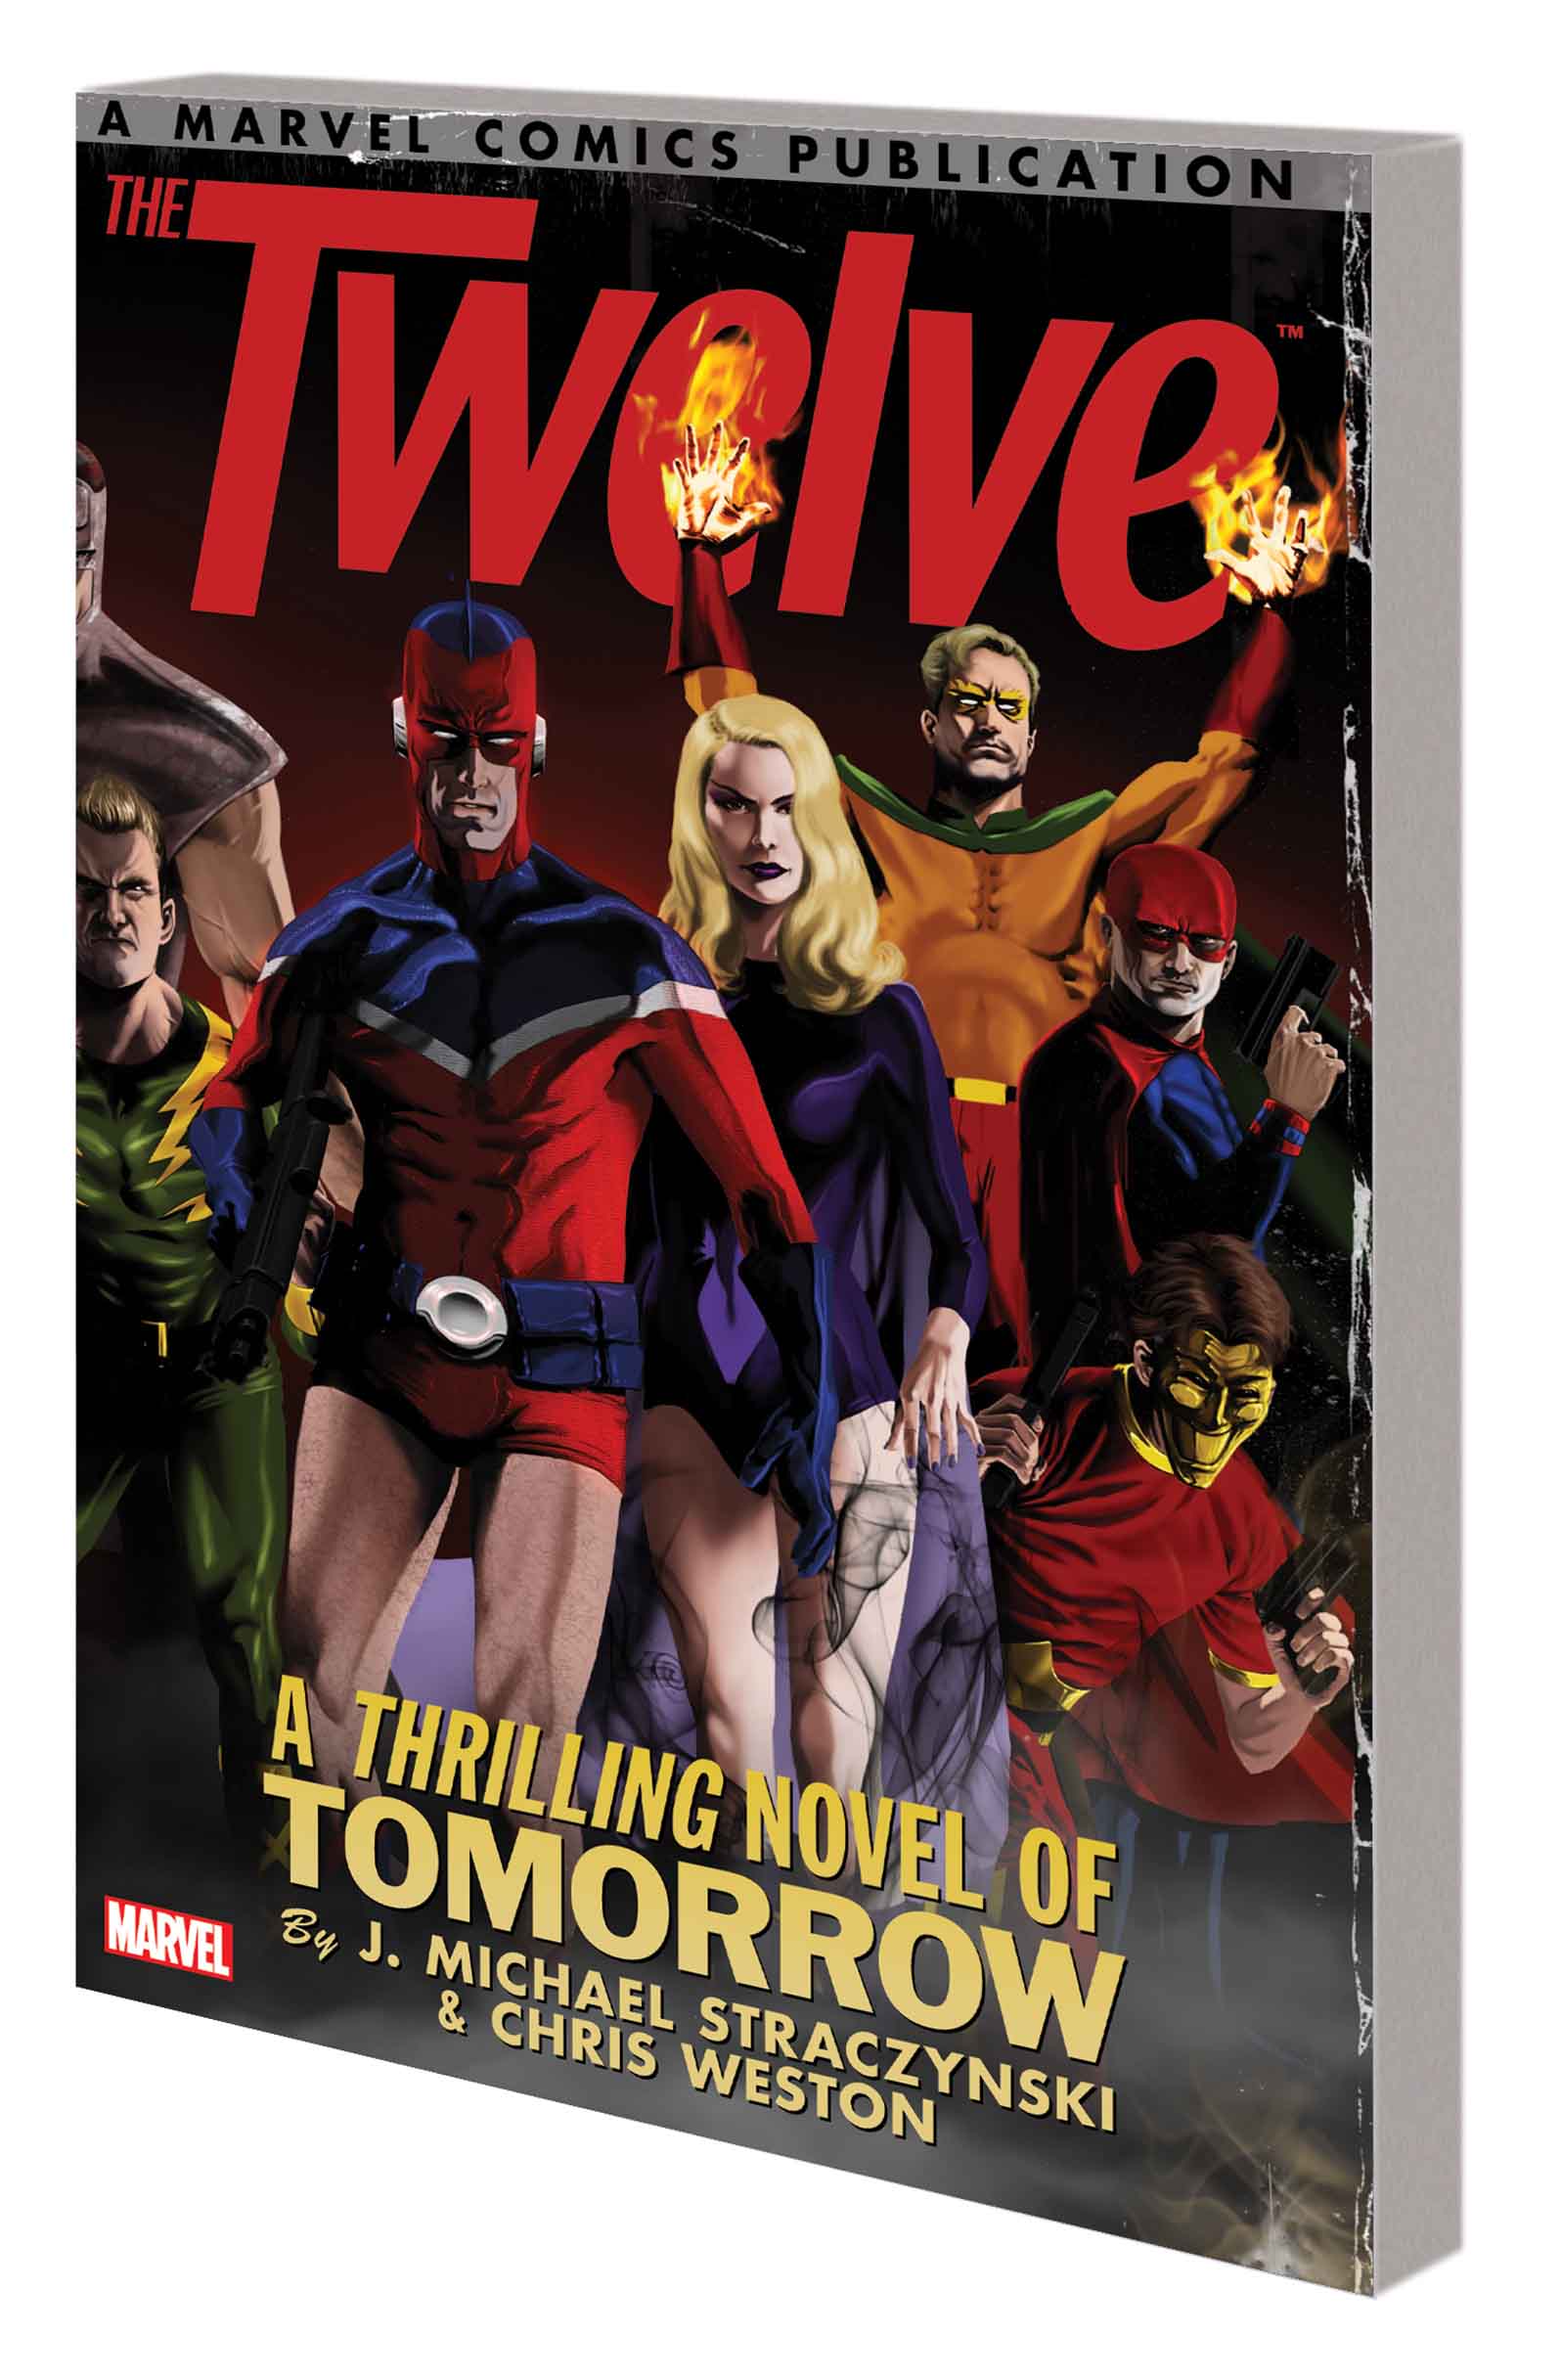 The Twelve: The Complete Series (Trade Paperback)